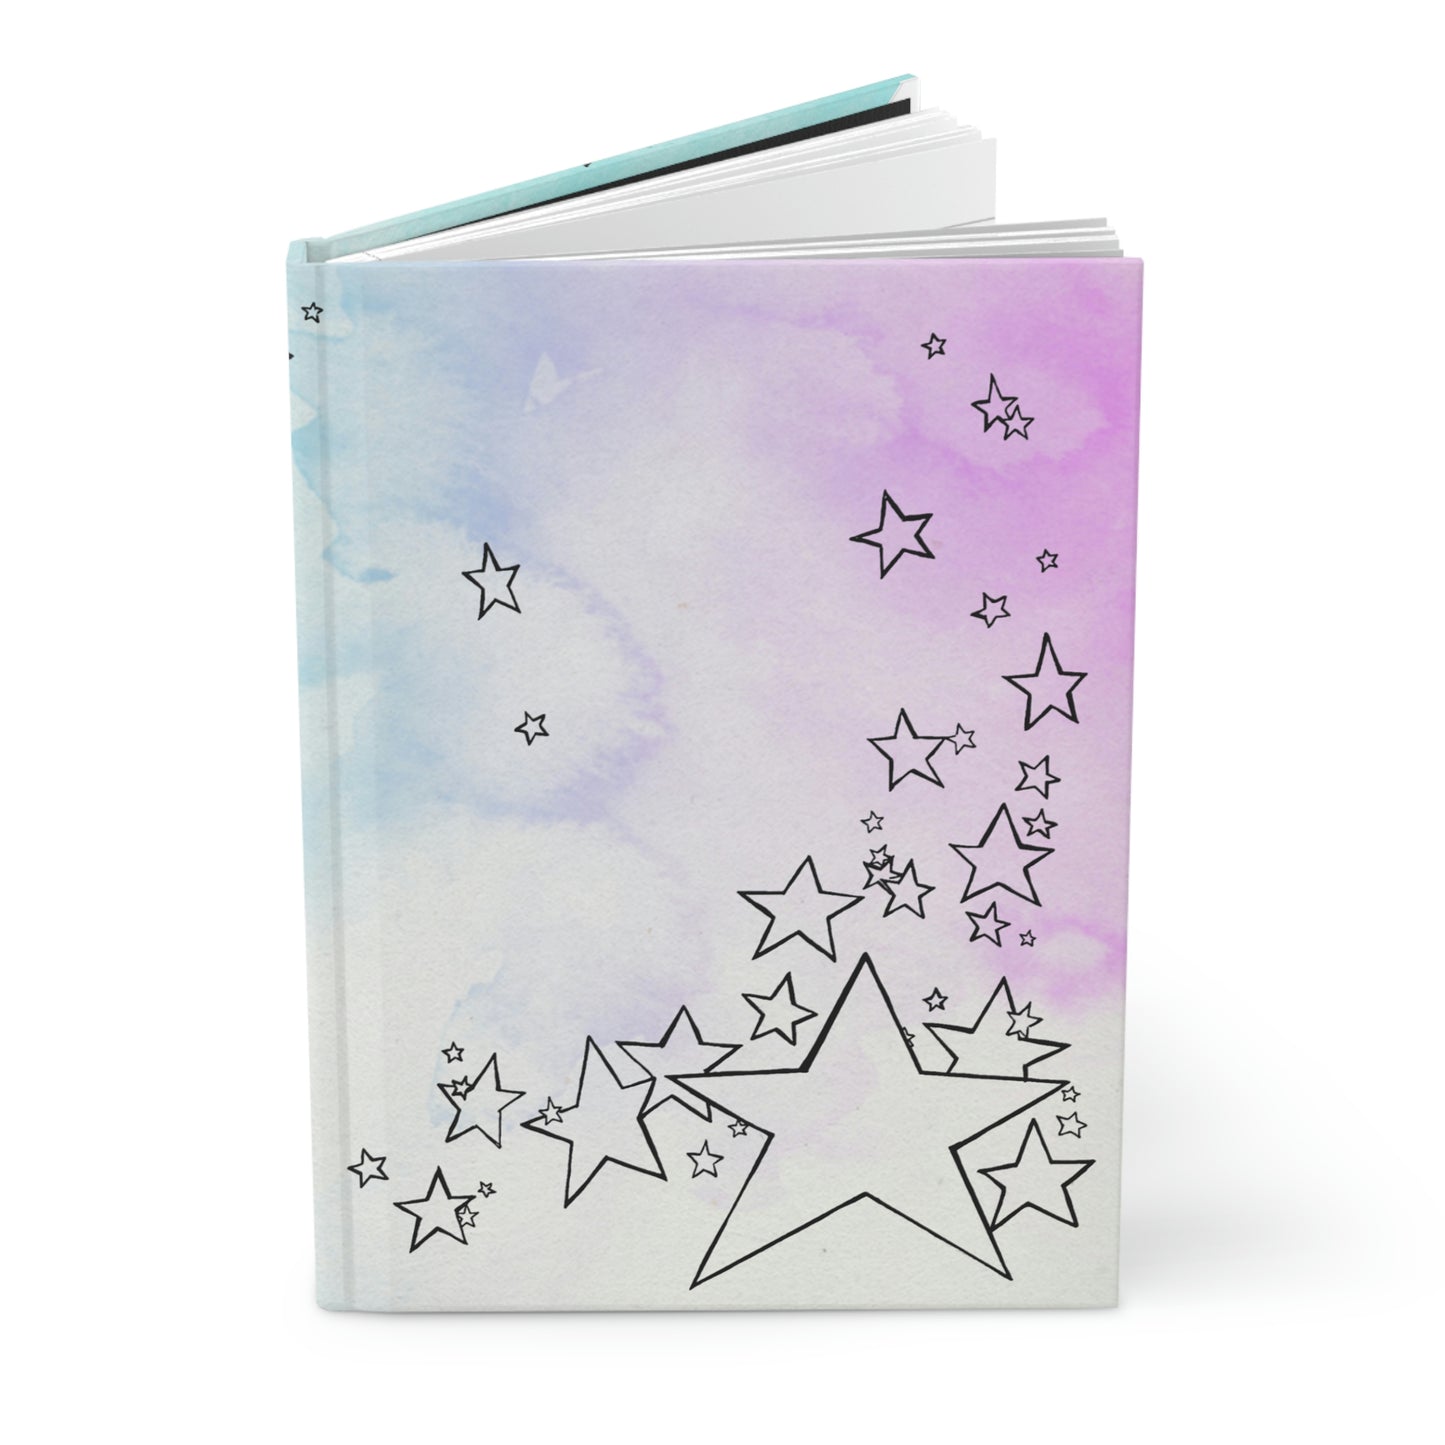 Teal and Pink Cotton Candy Dream Star Power Journal